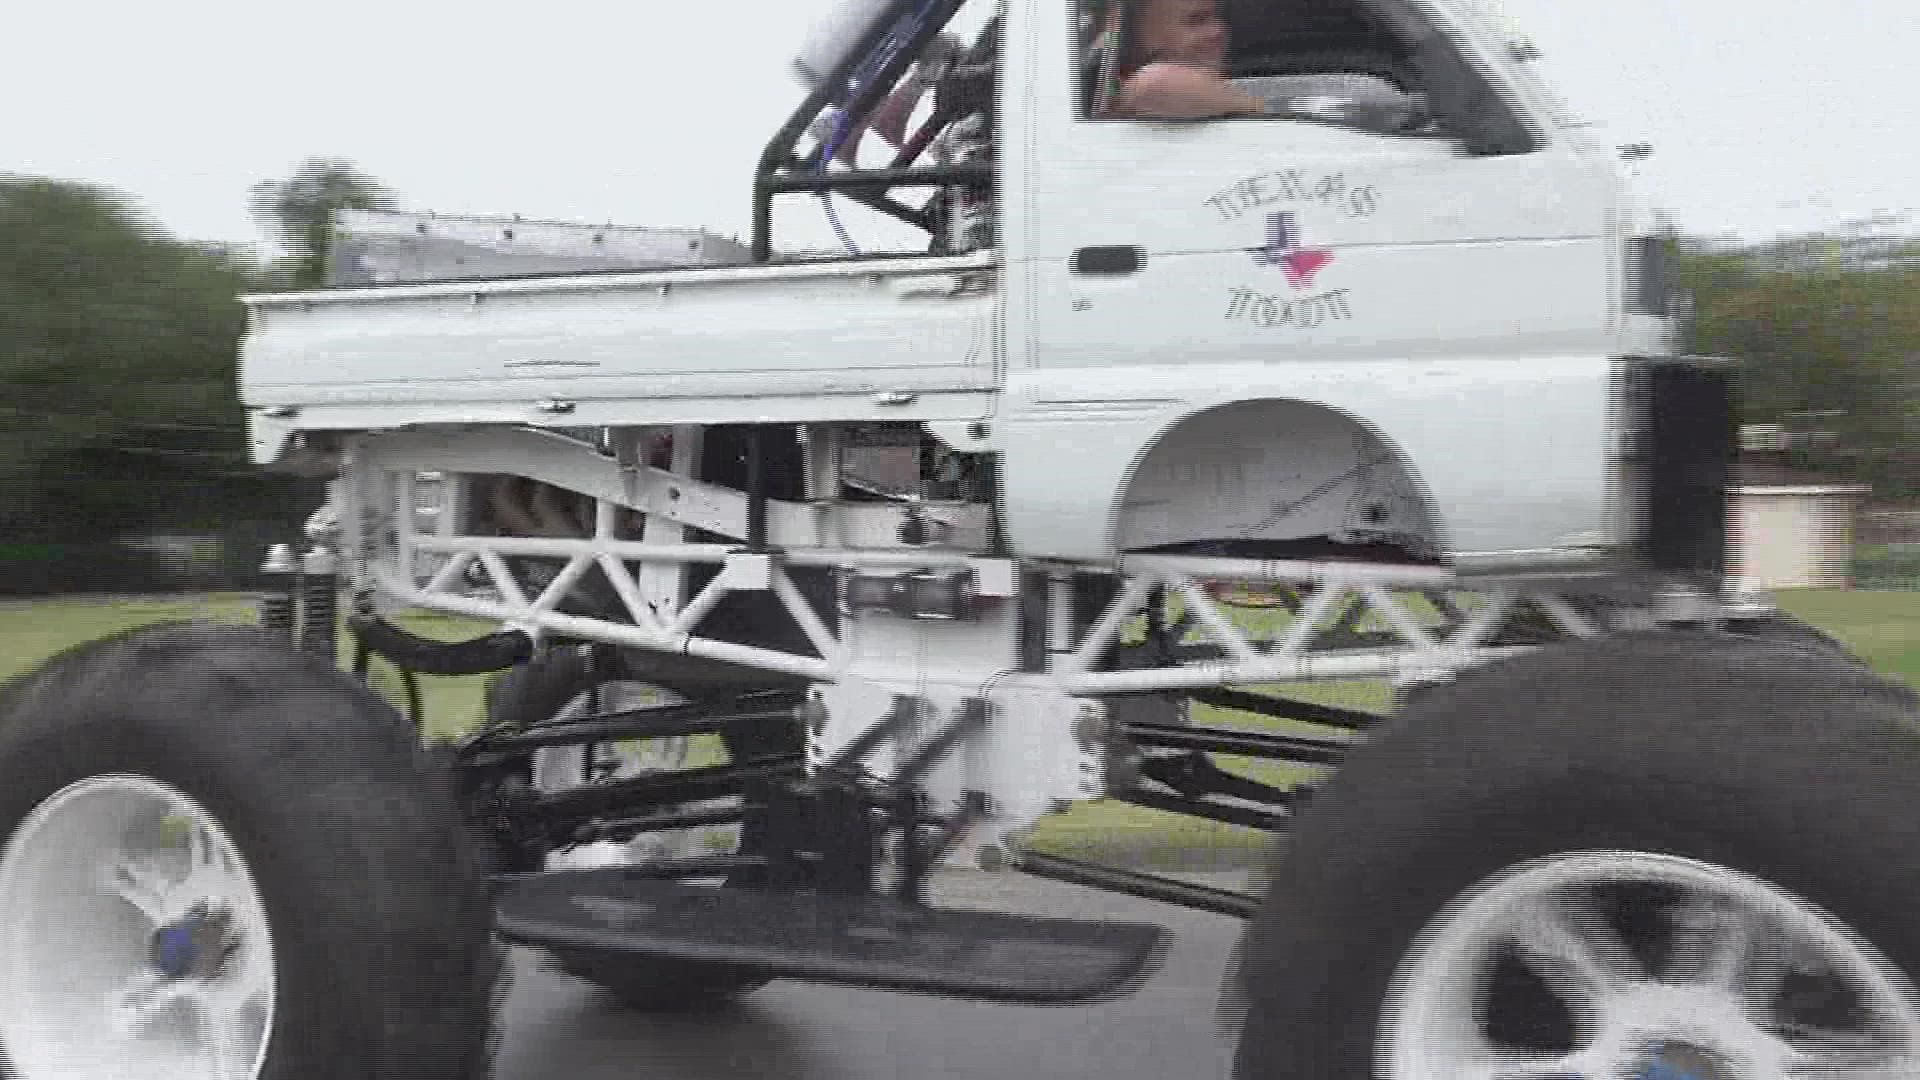 It started with a 1992 Autozam mini truck and ended with the award-winning, one-of-a-kind monster truck, Texas Toot.